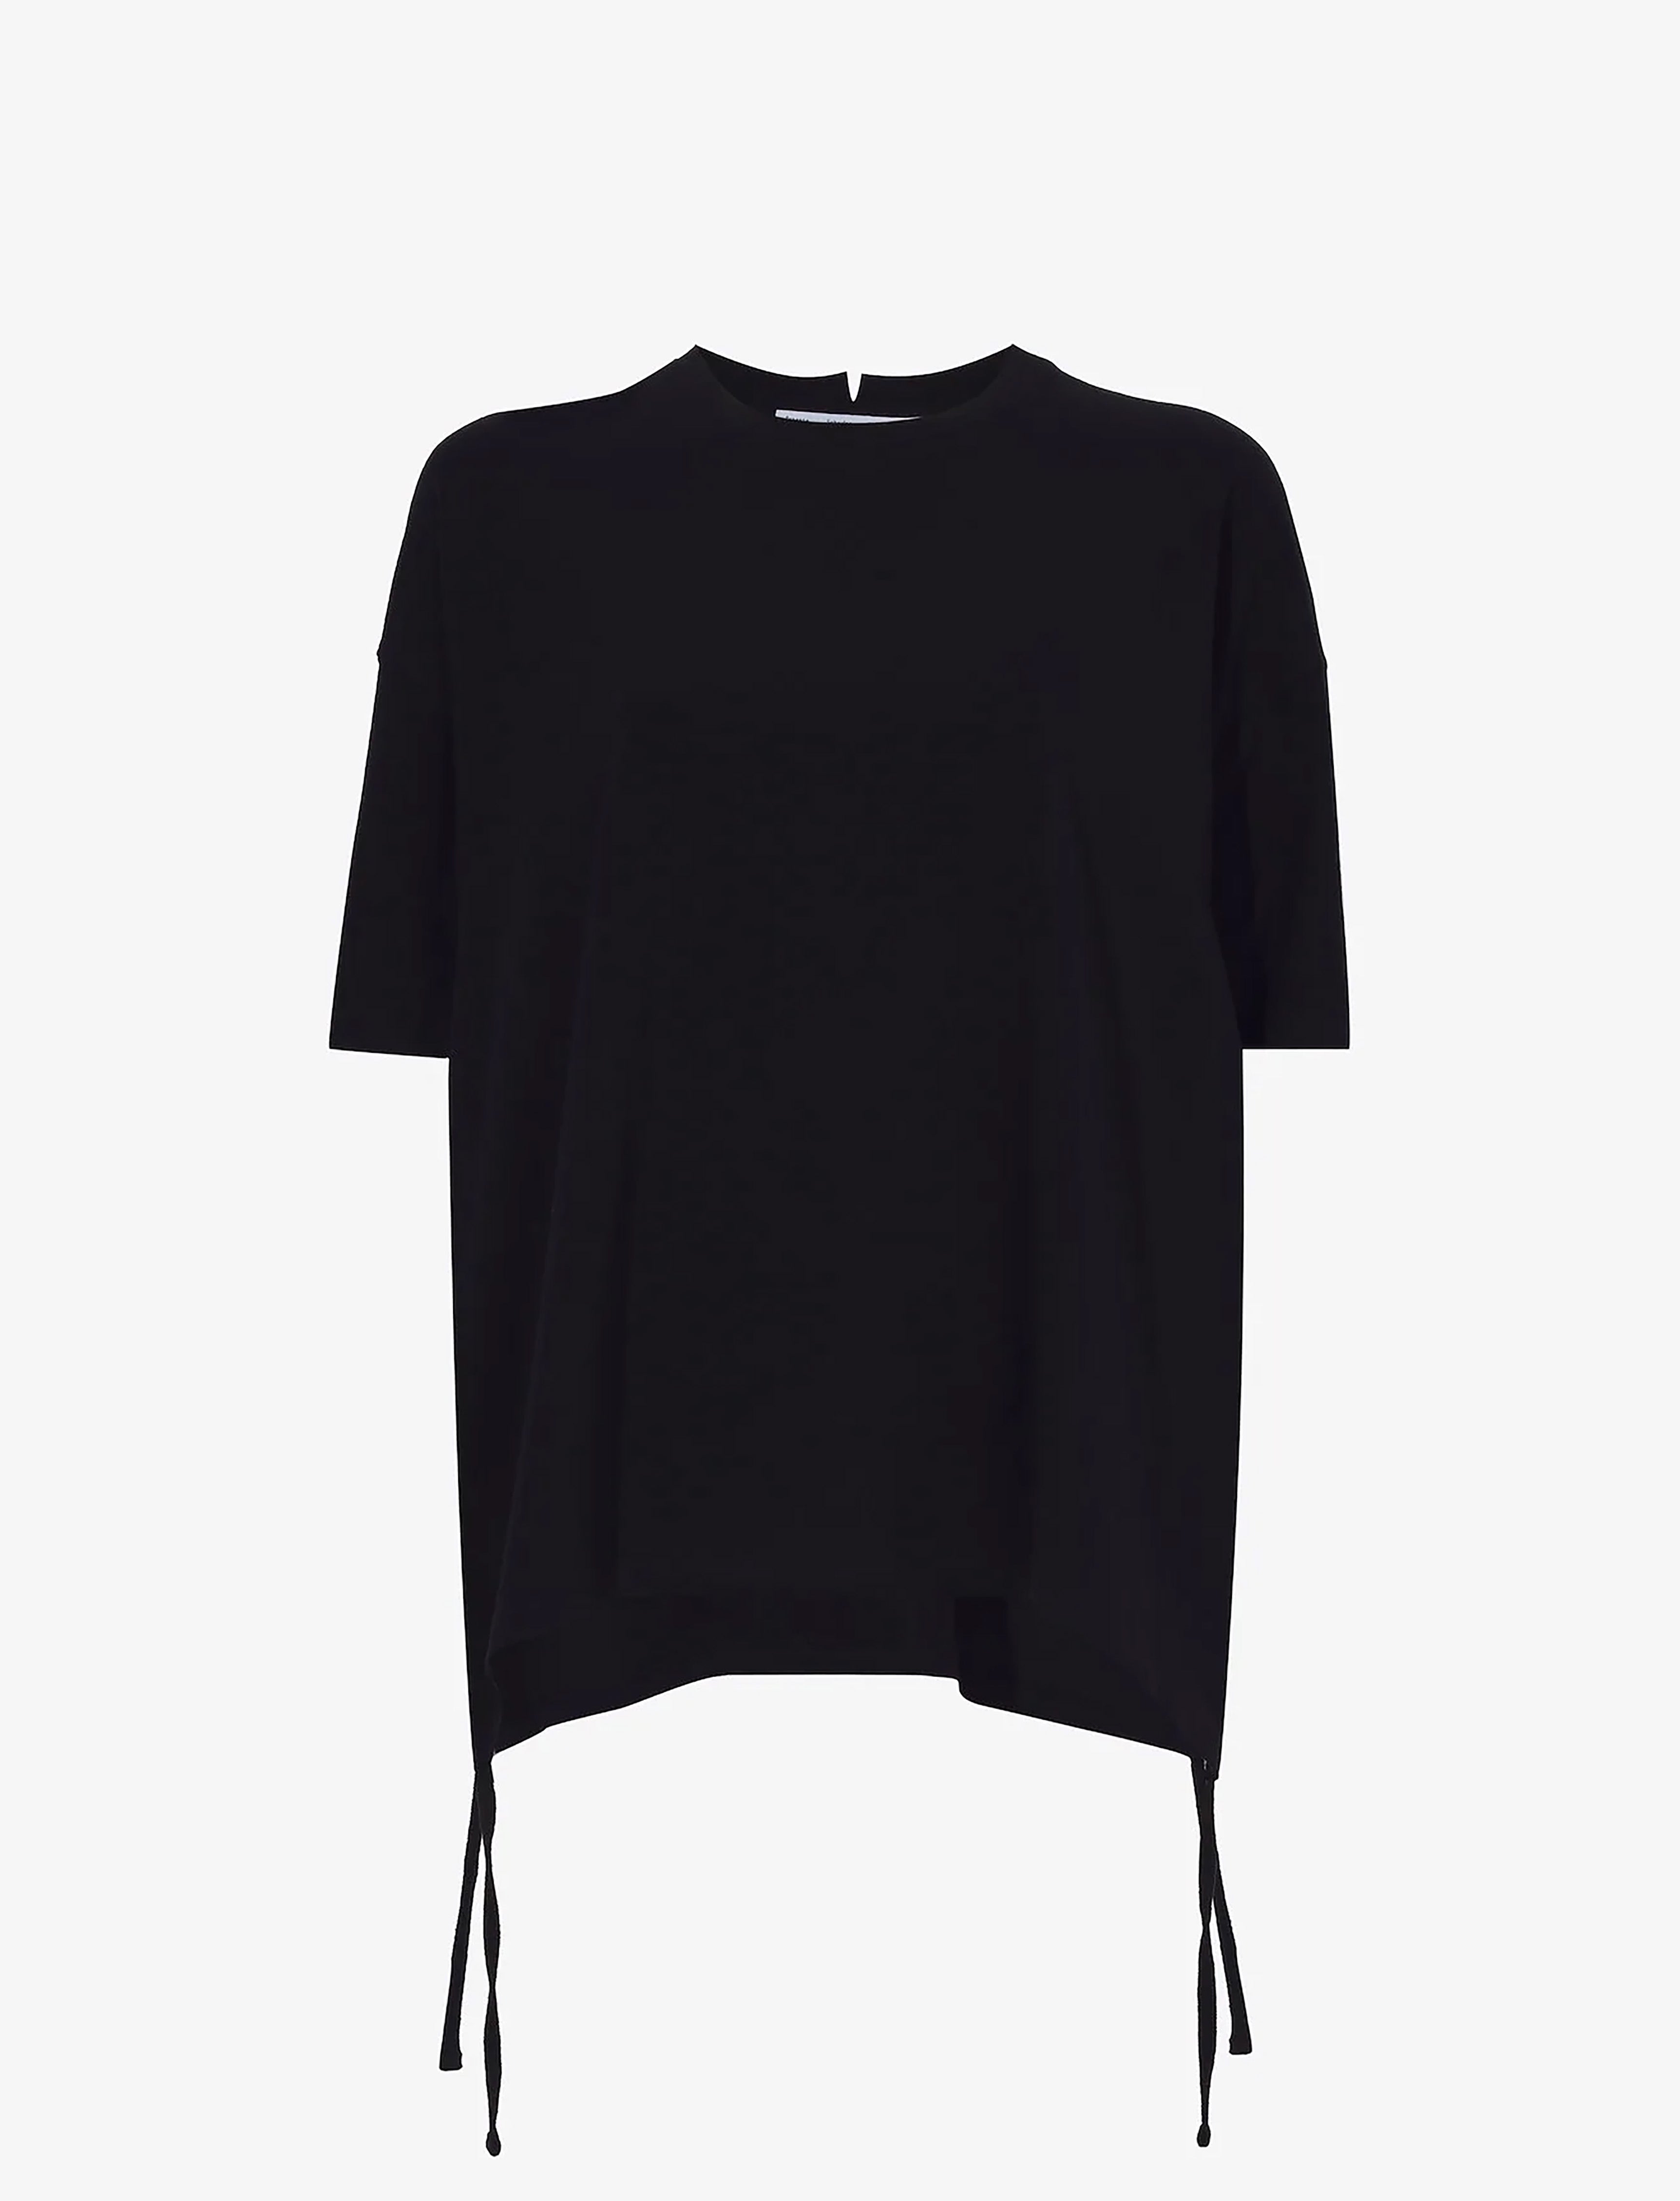 White Label T-Shirts | Proenza Schouler - Official Site